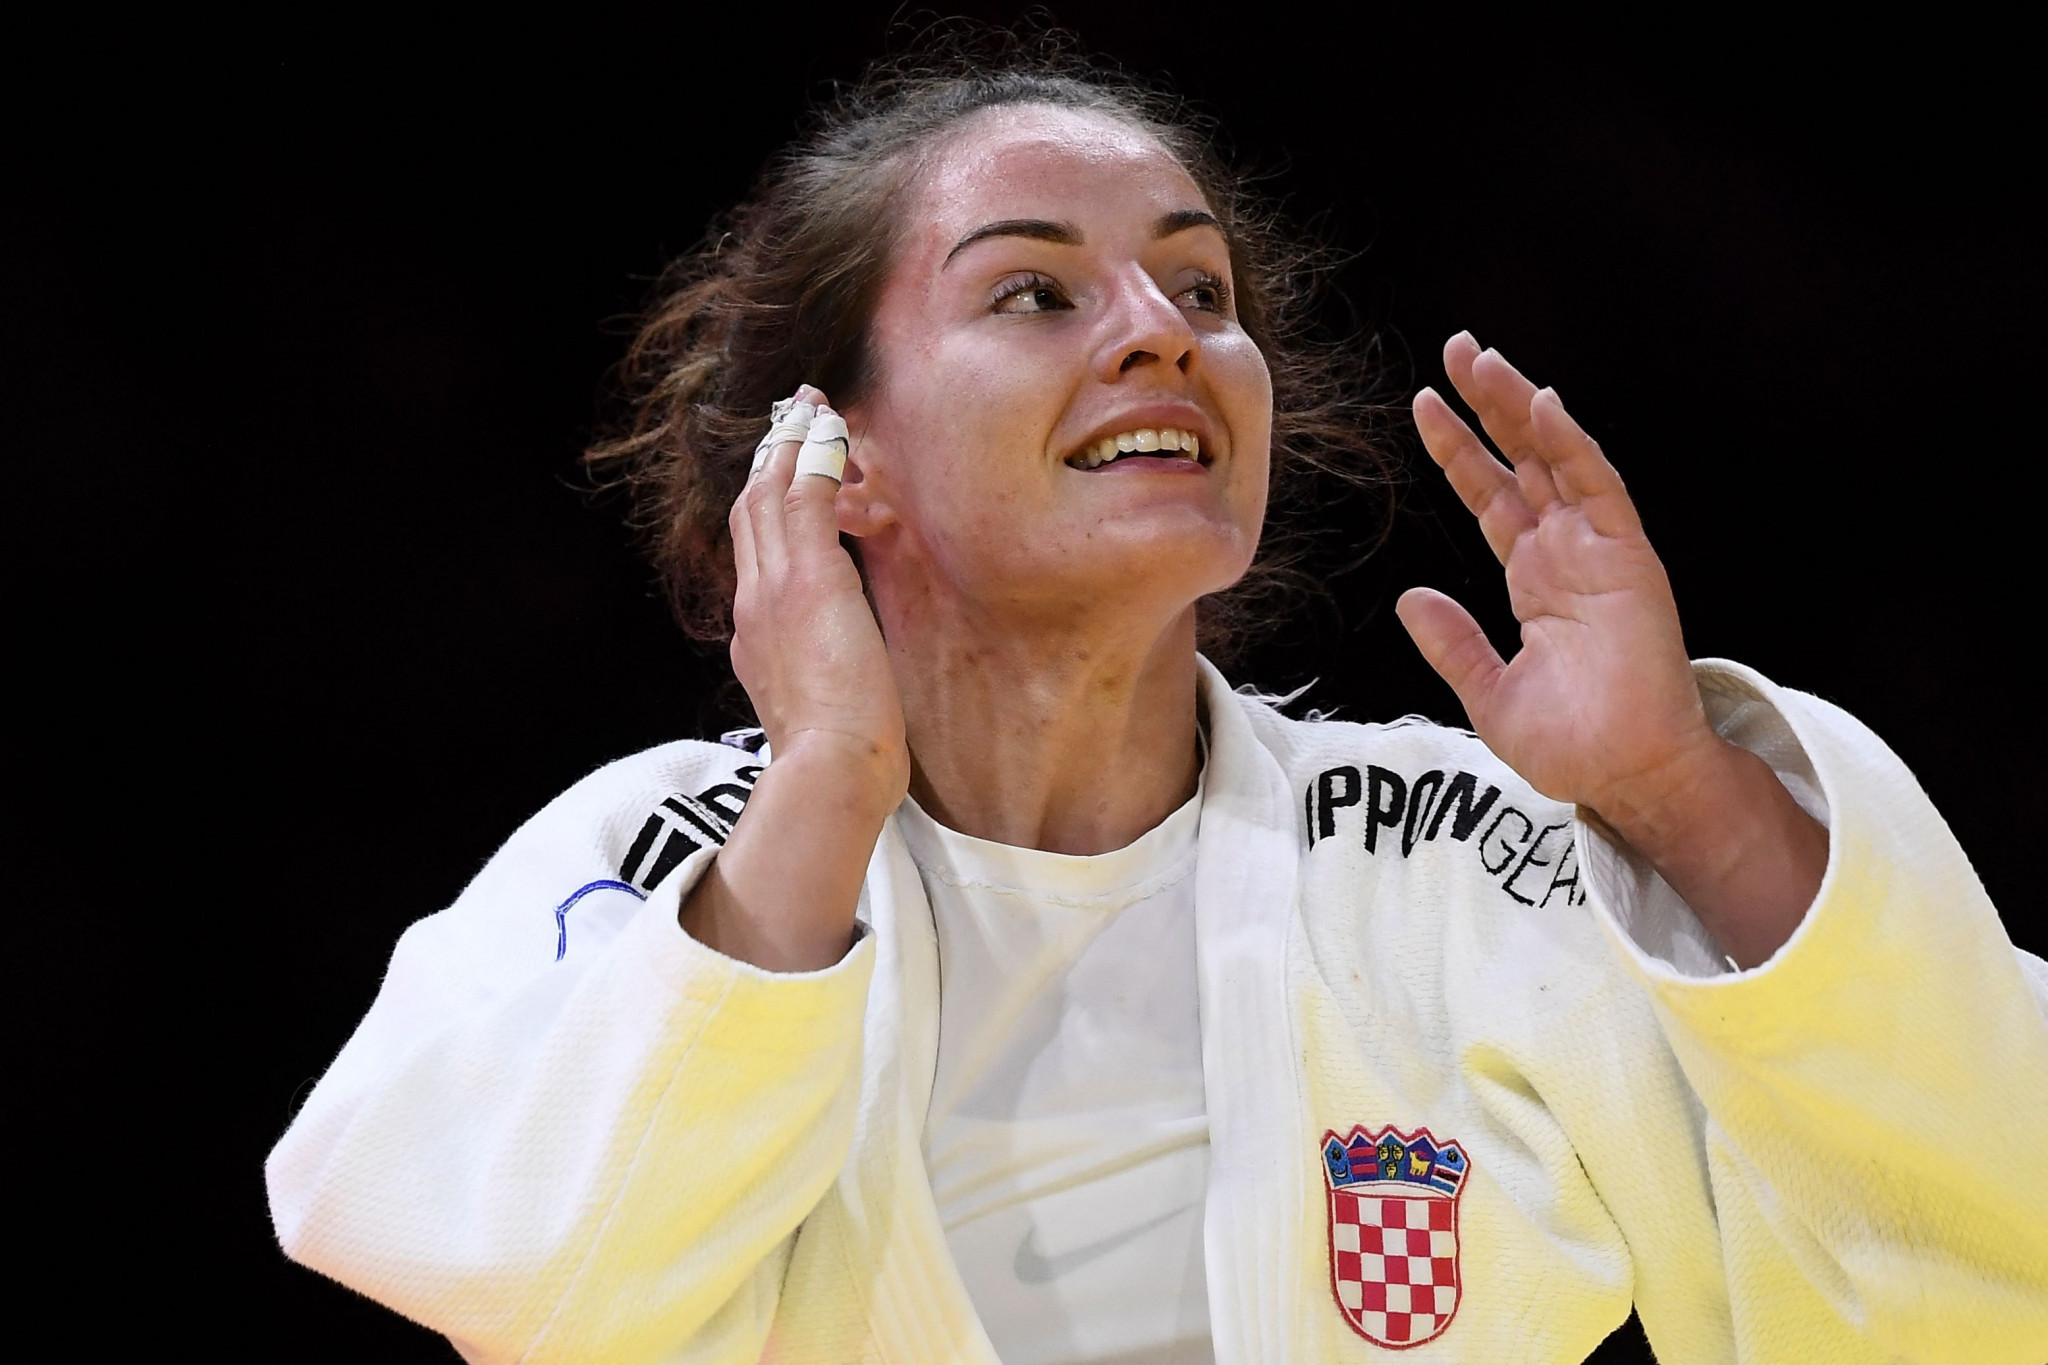 World champion and home favourite in the women’s under-70kg category Barbara Matic will be hoping to clinch gold ©Getty Images